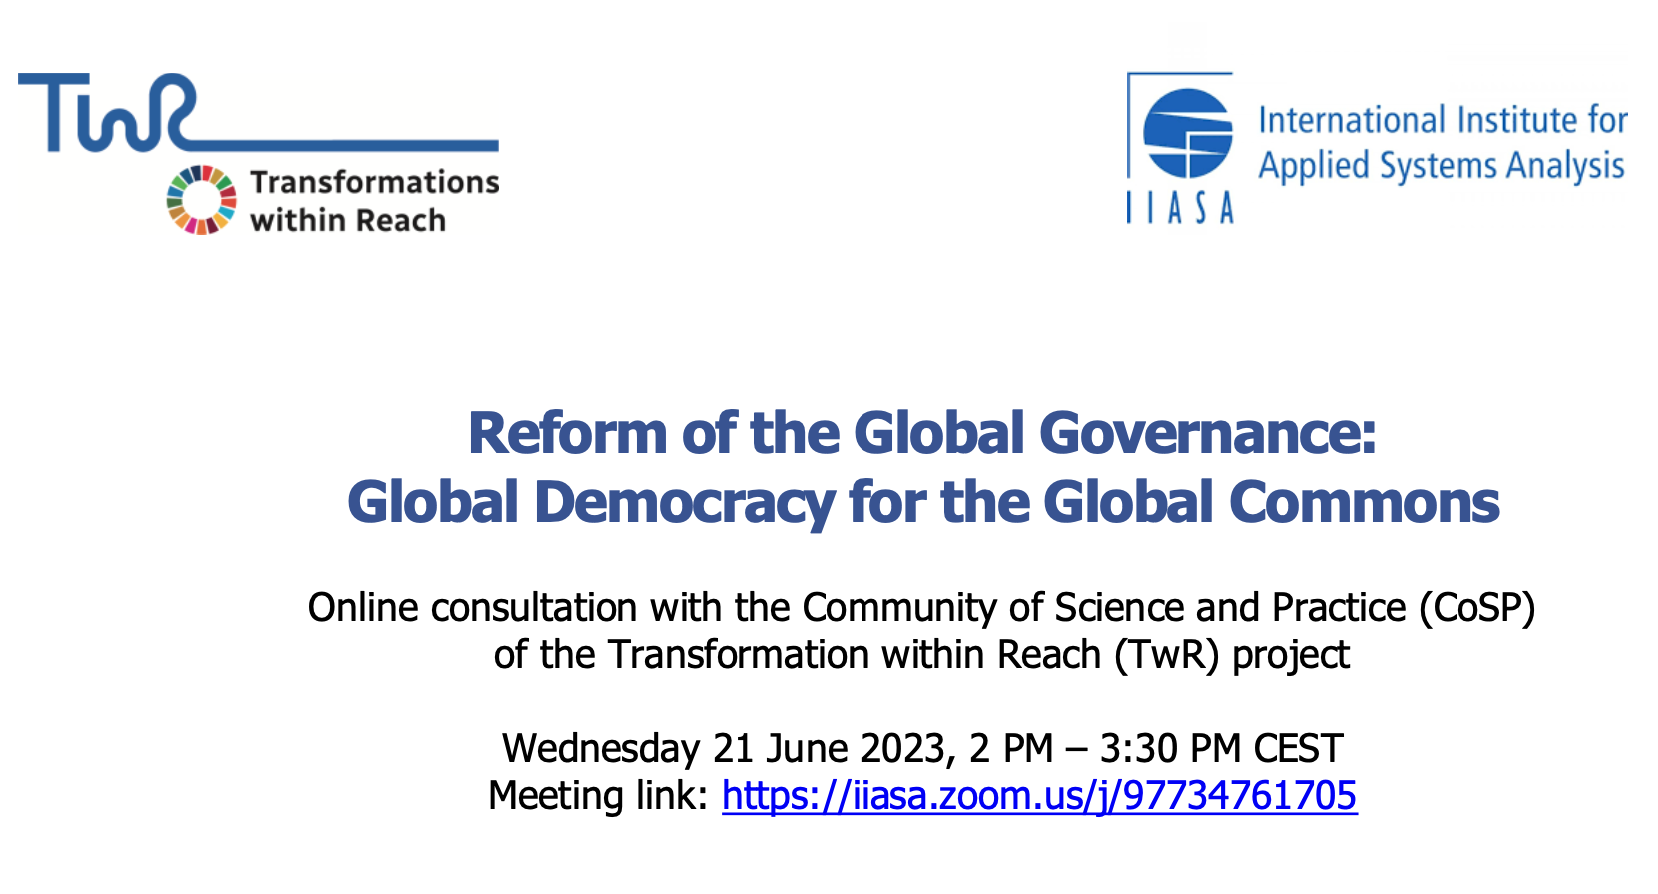 Online consultation with the Community of Science and Practice (CoSP)